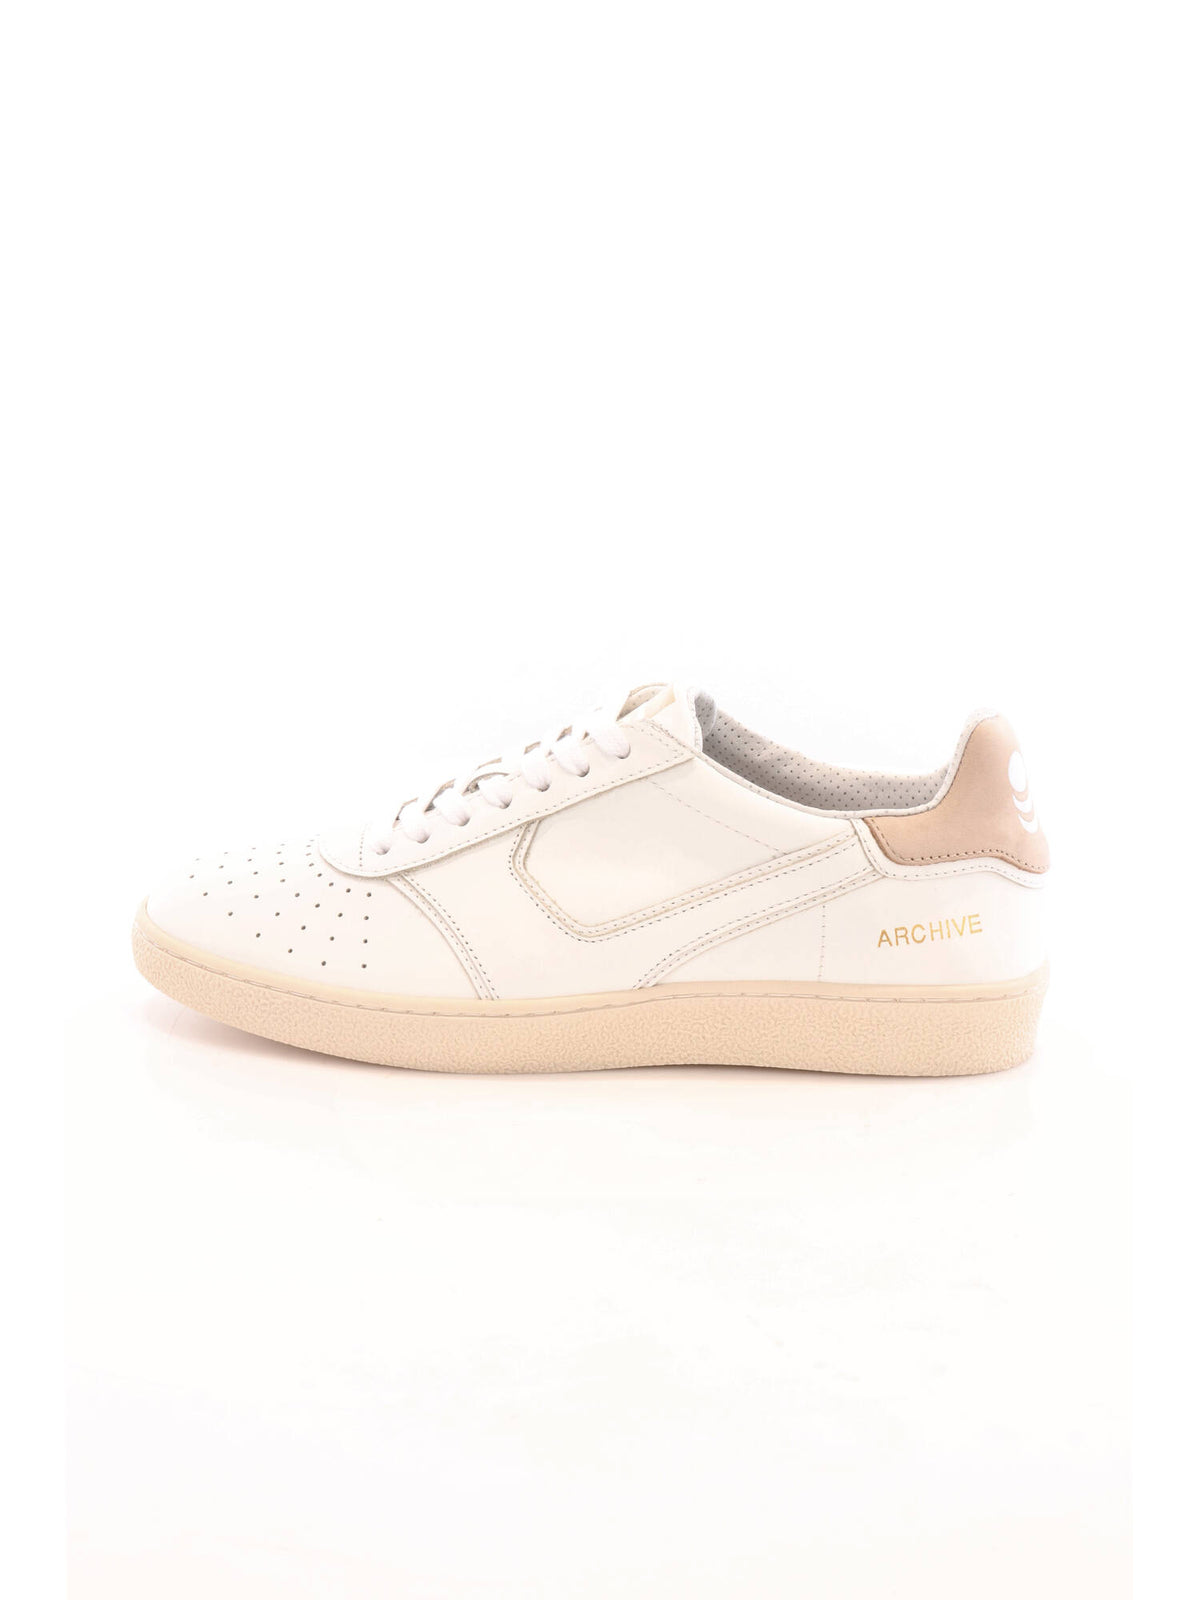 PANTOFOLA D'ORO SNEAKERS ARCHIVE COLORE BIANCO & BEIGE